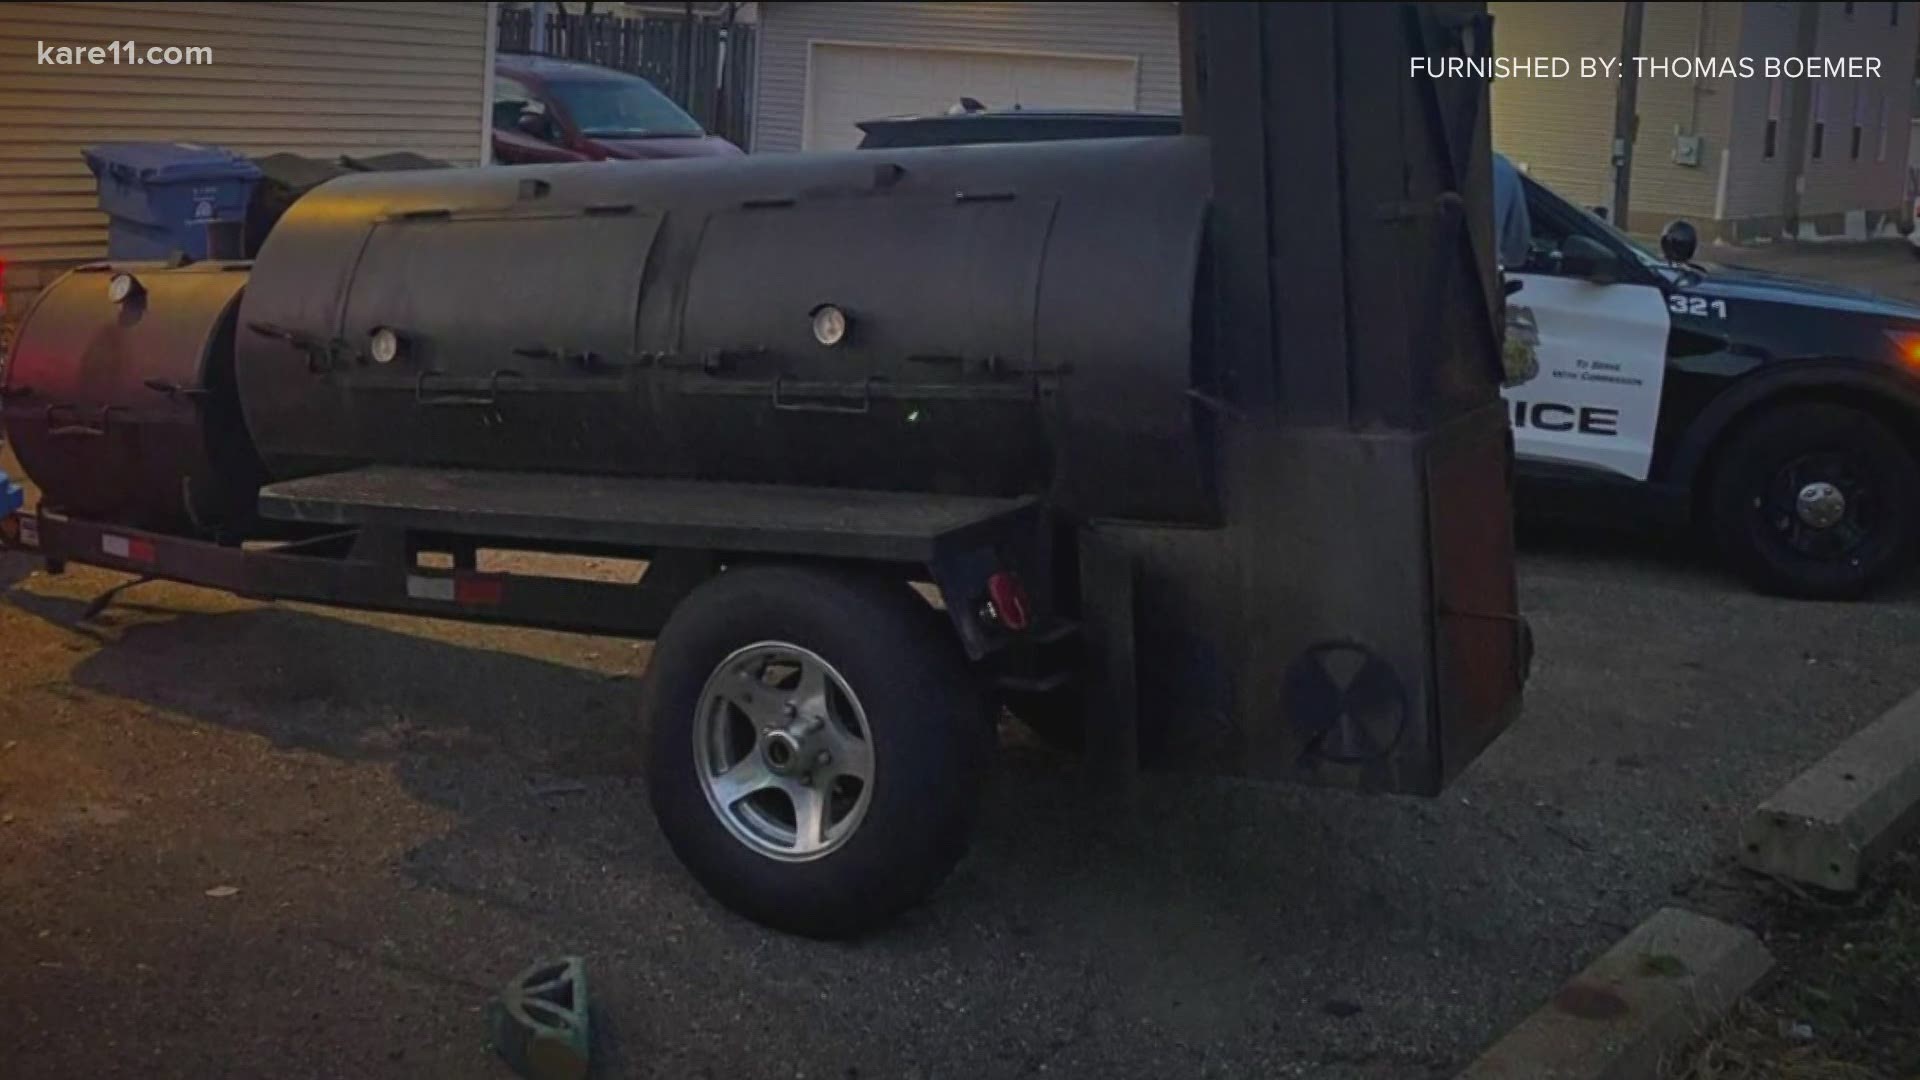 Chef Thomas Boemer had his custom two ton meat smoker stolen Sunday afternoon. After a whirlwind 24 hours, the smoker was found.